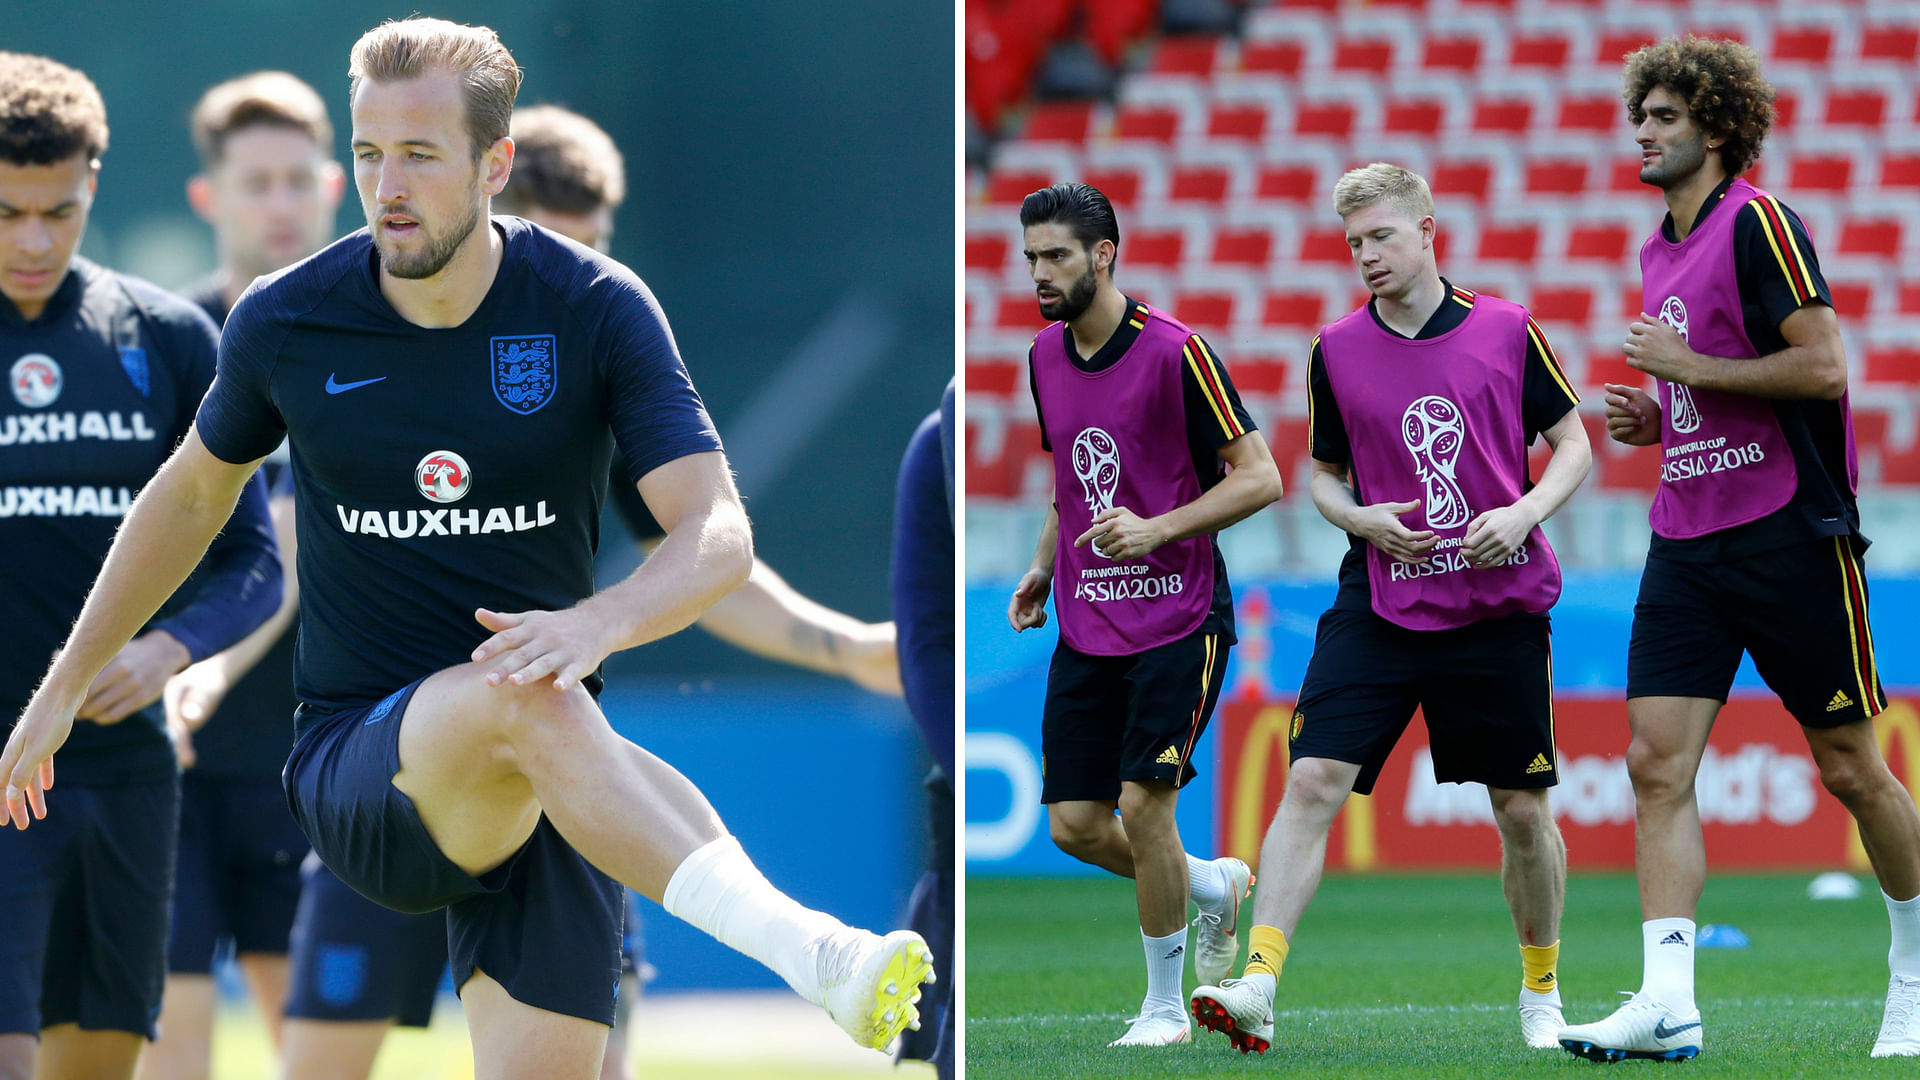 England’s Harry Kane and Belgium’s Yannick Carrasco,  Kevin De Bruyne,  Marouane Fellaini warming up during their official training.